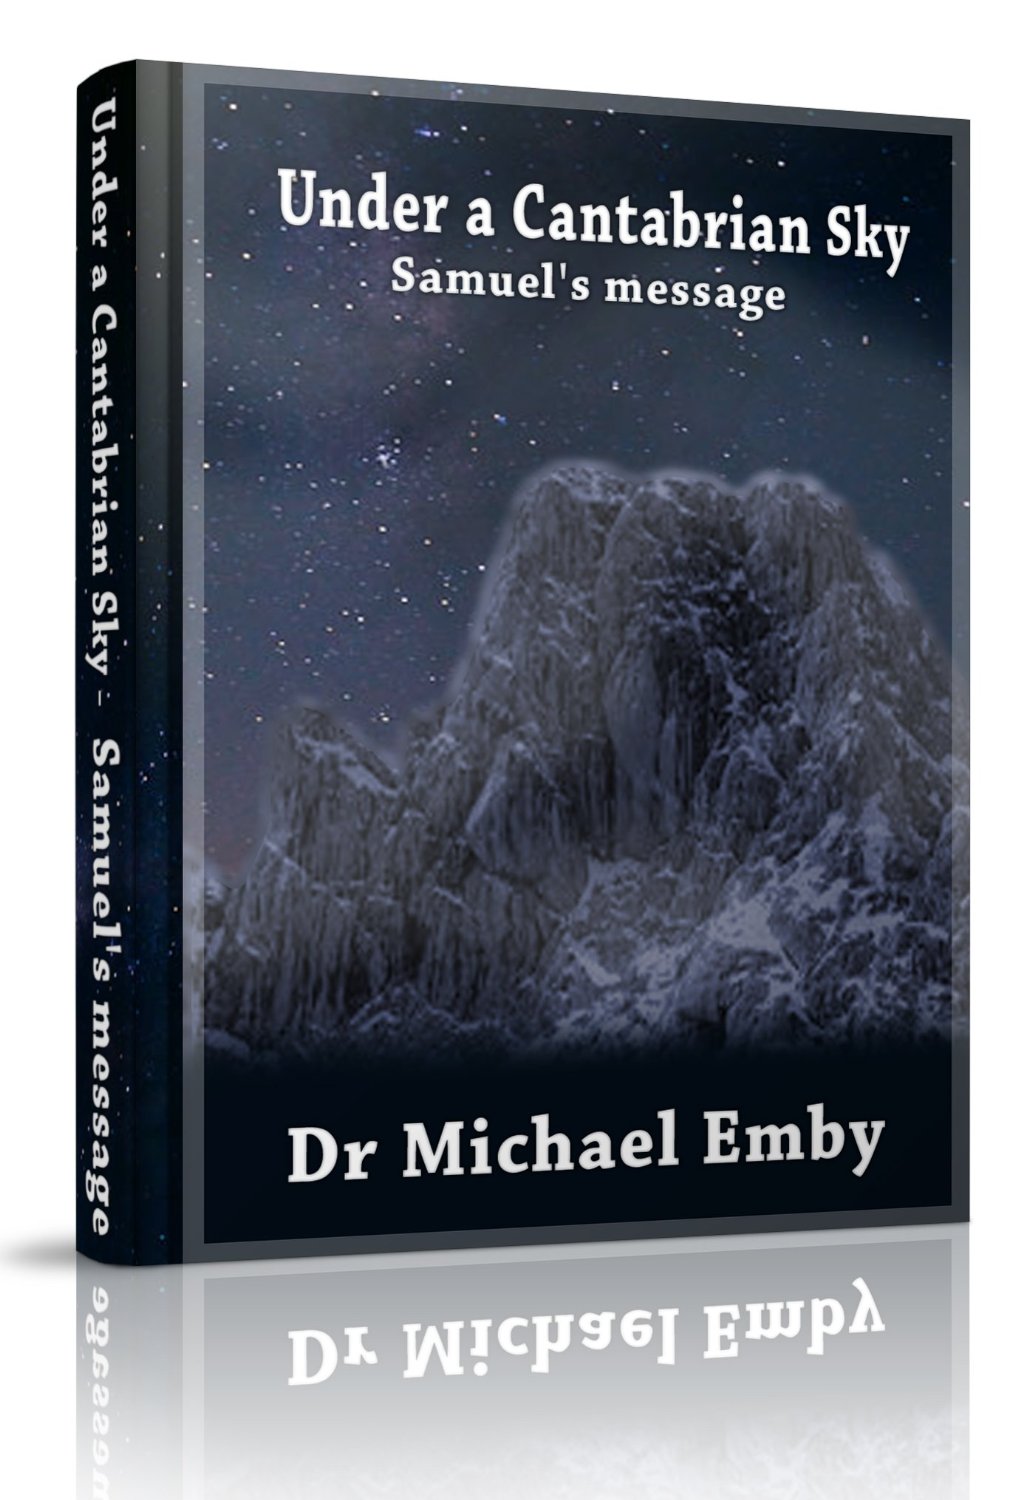 Under a Cantabrian Sky by Dr Michael Emby